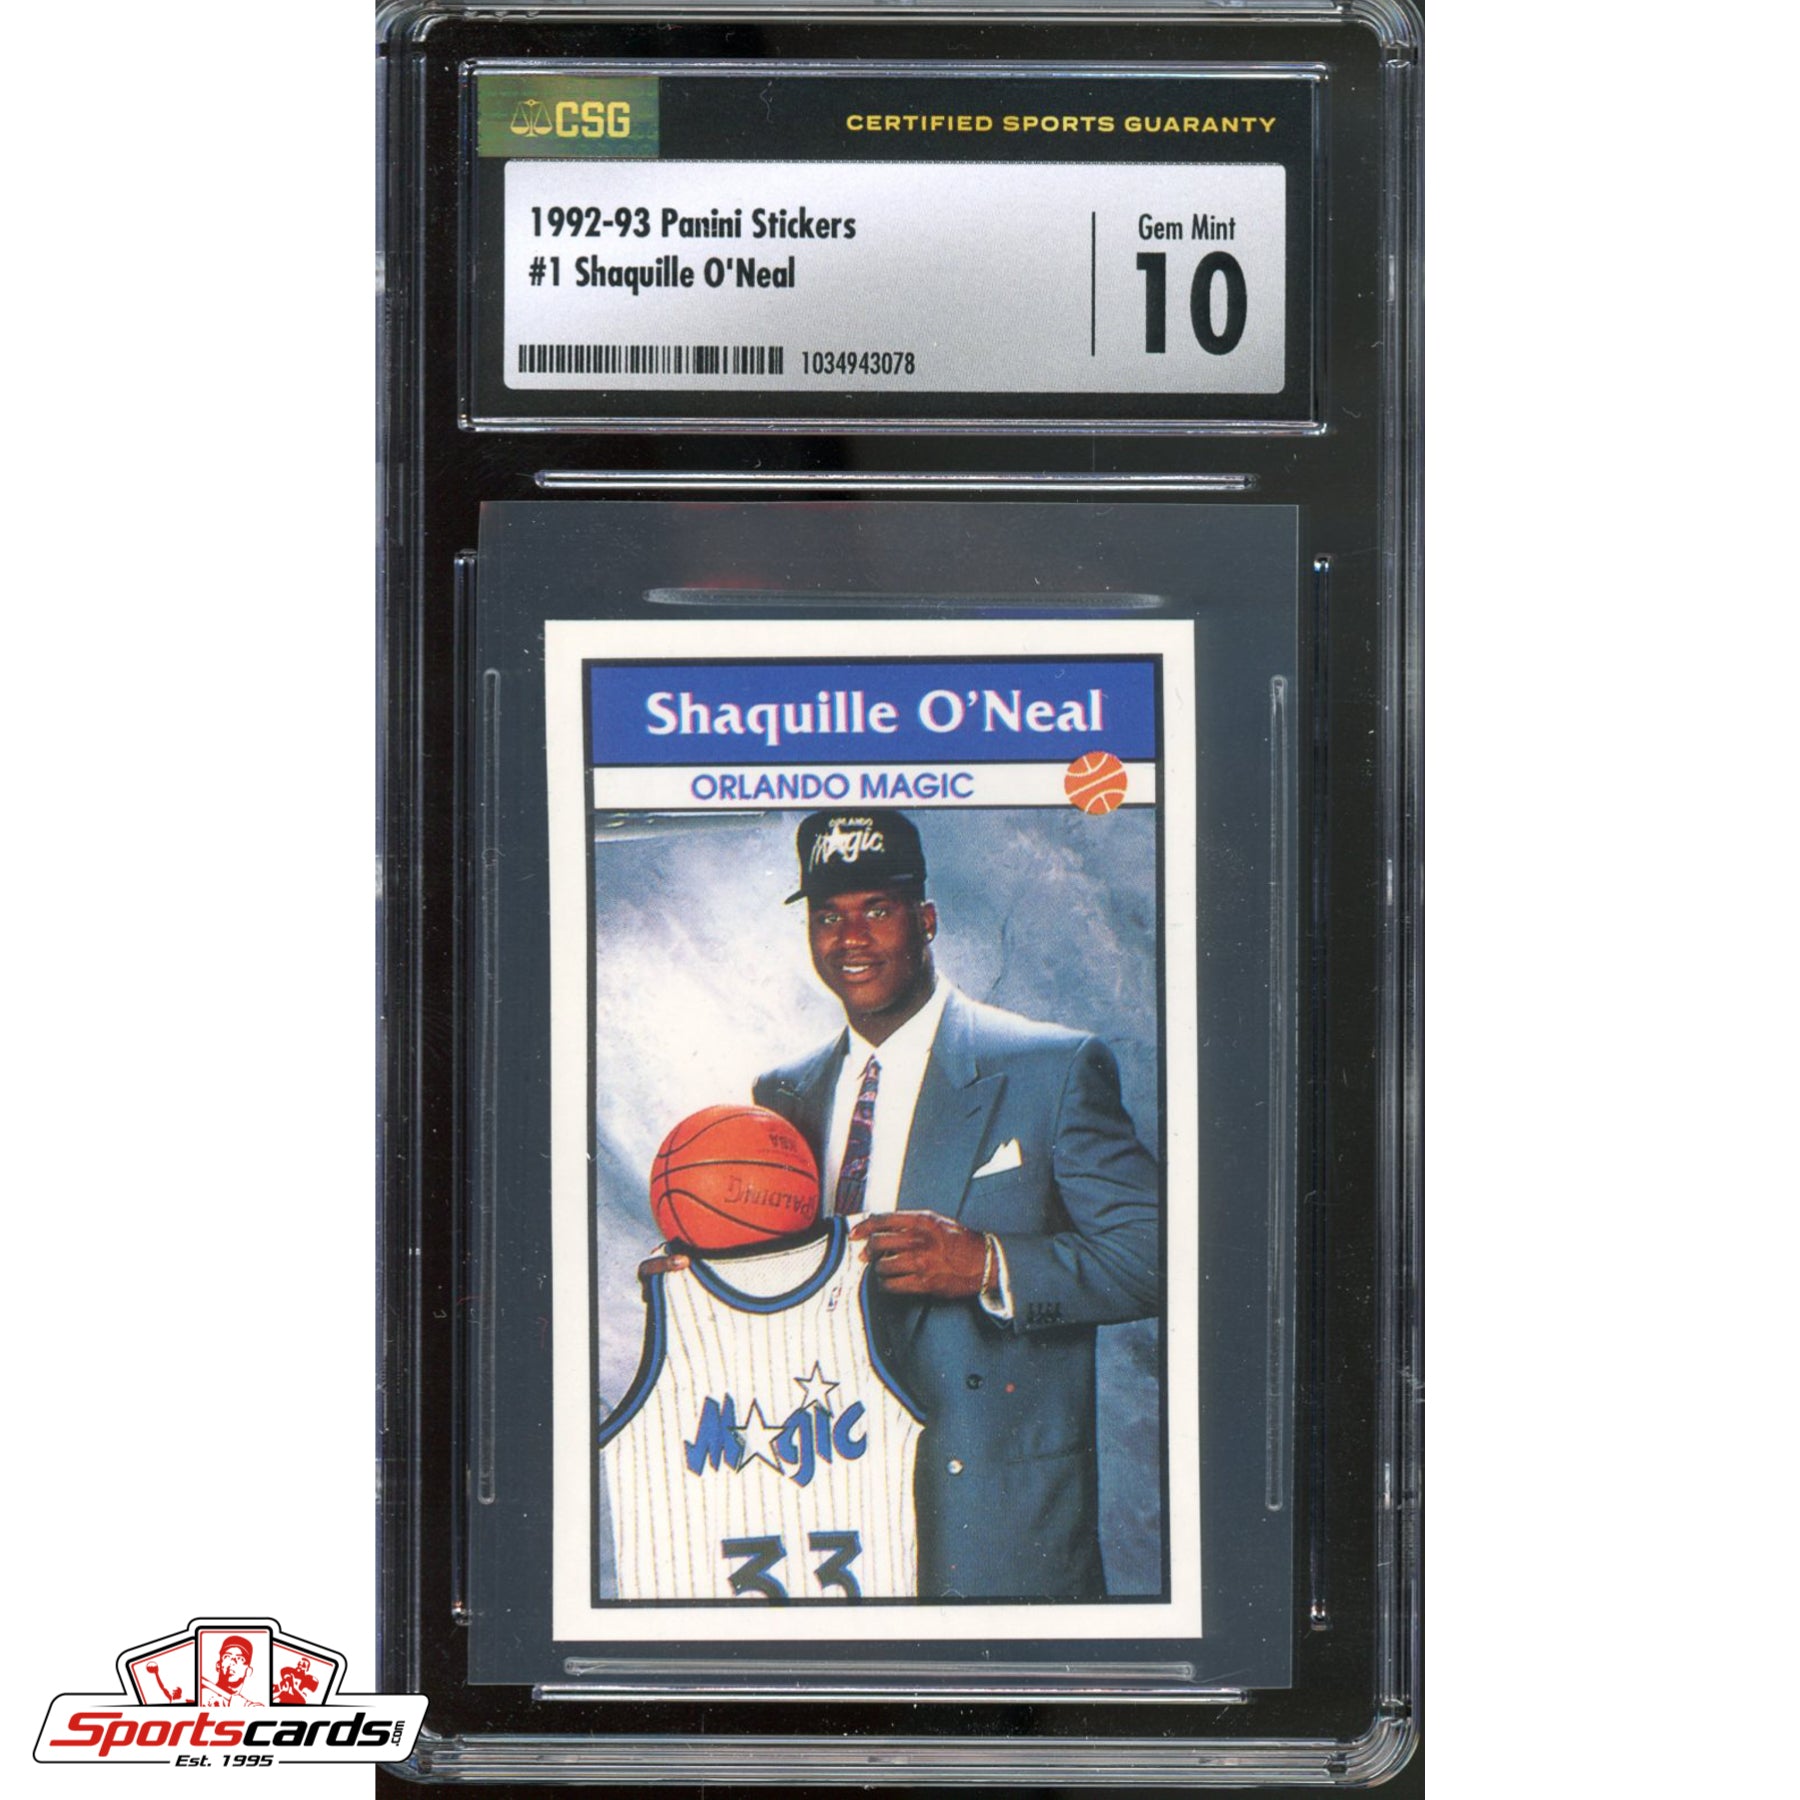 1992-93 Panini Stickers Shaquille O'Neal RC #1 CSG Gem Mint 10